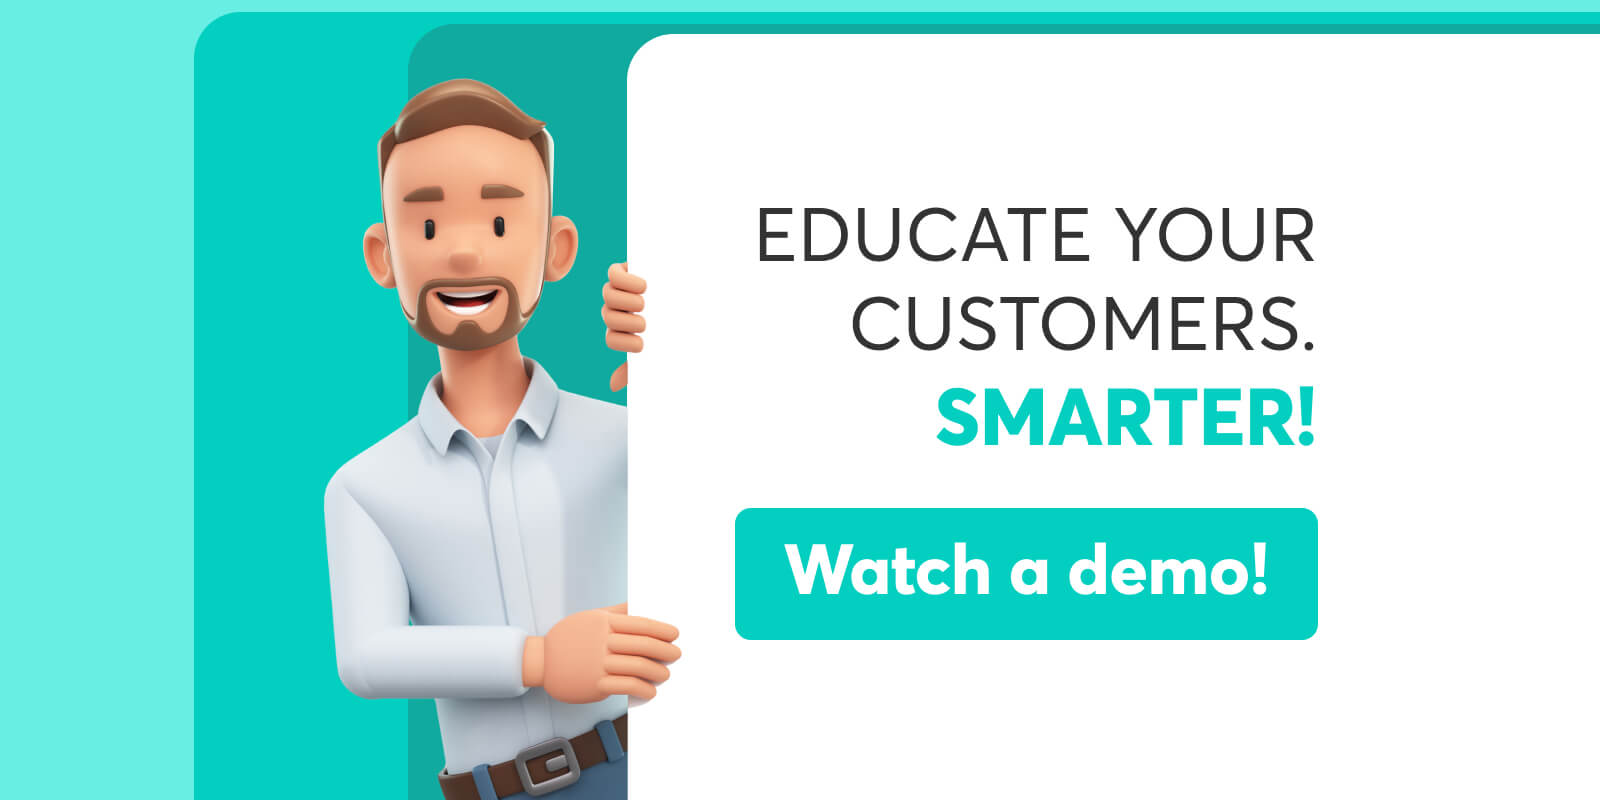 Educate your customers smarter - watch a demo